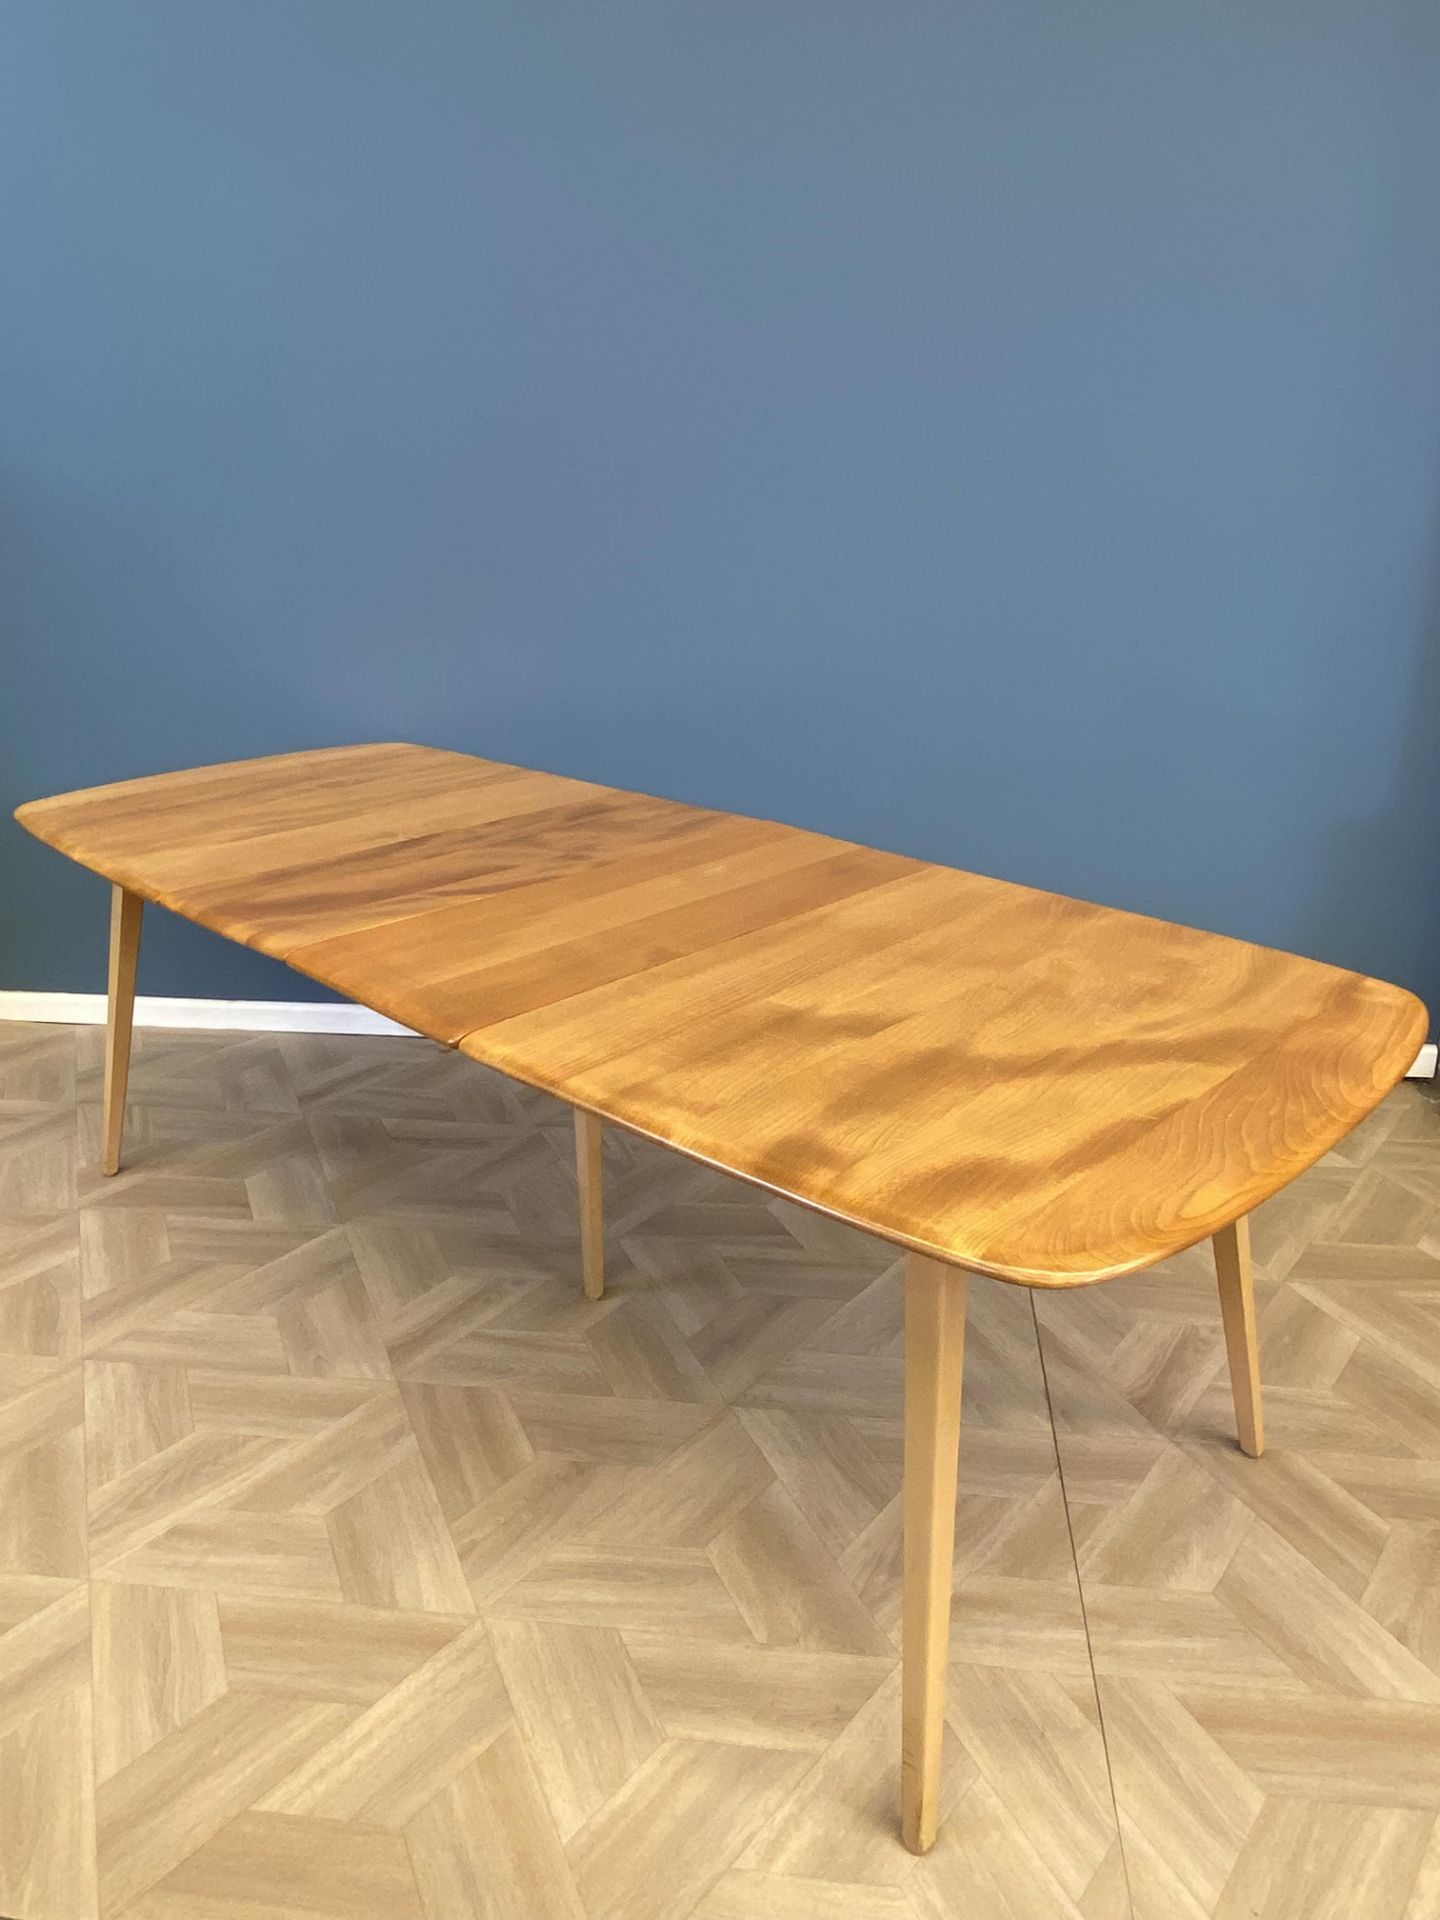 Ercol extending dining table - Image 2 of 9